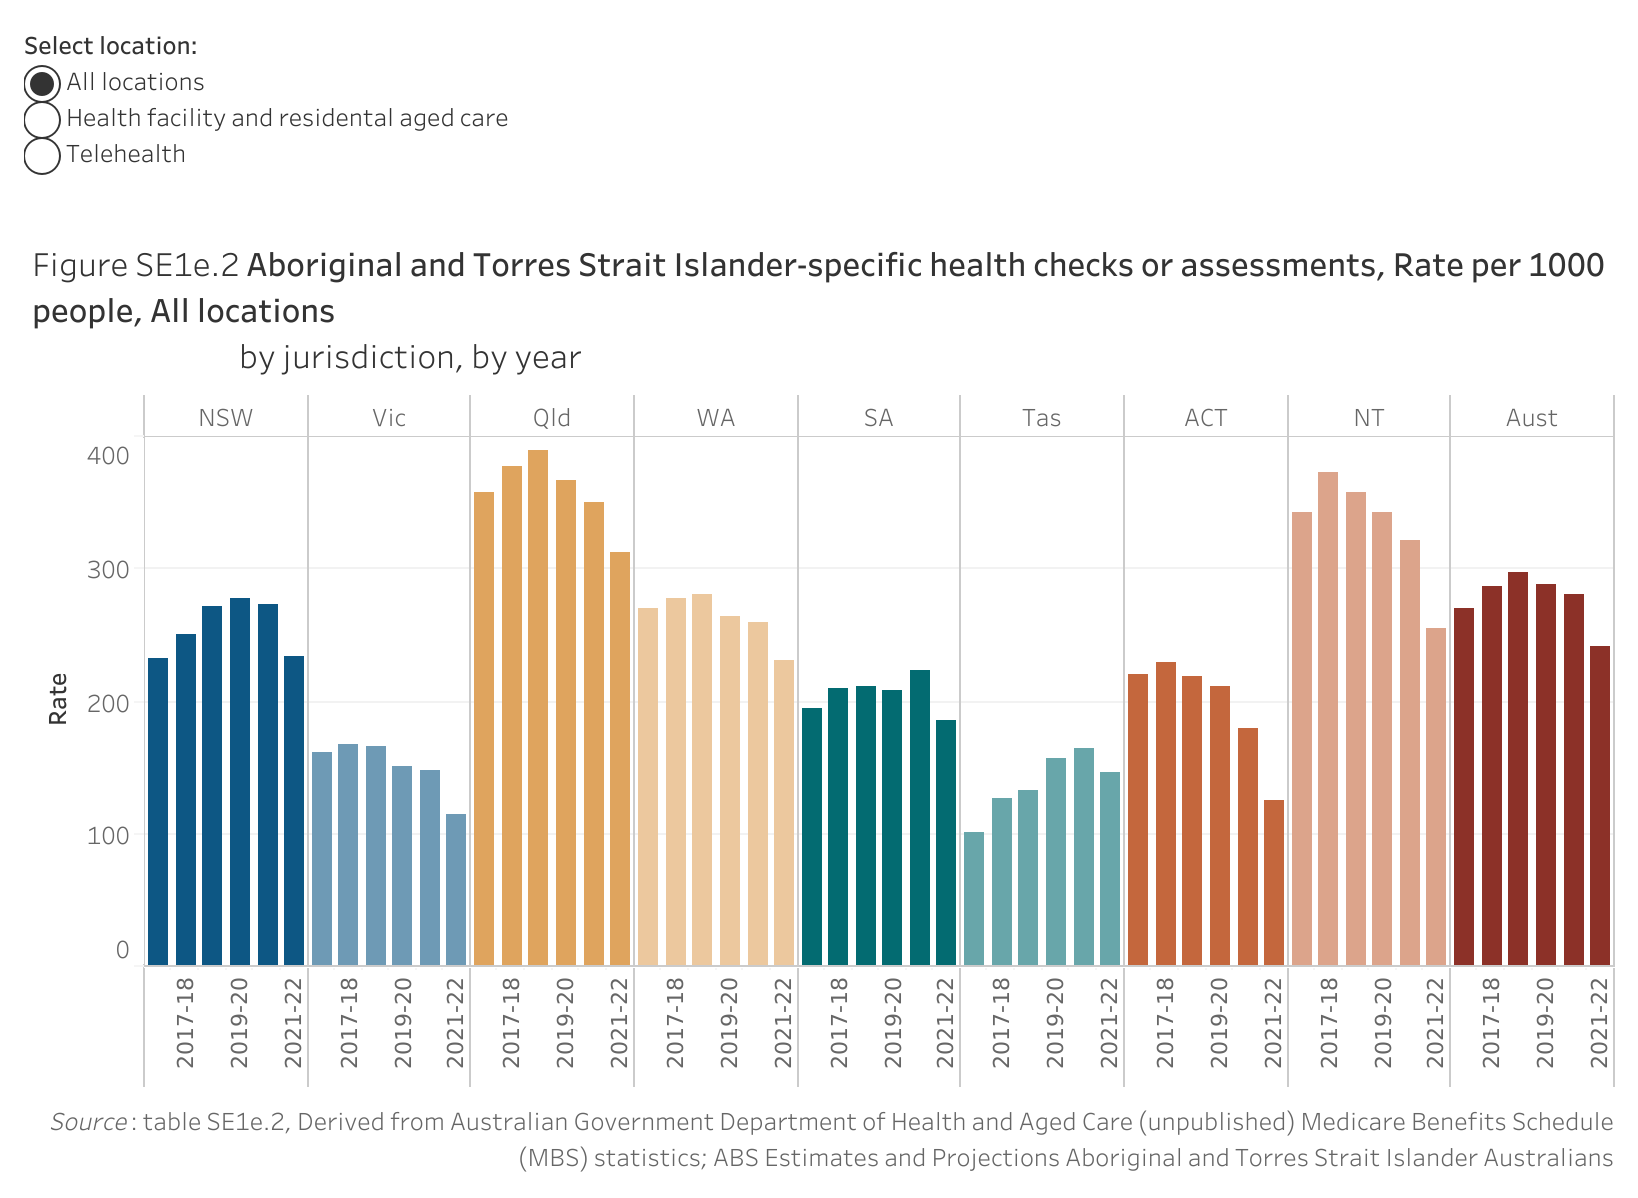 Figure SE1e.2 shows Aboriginal and Torres Strait Islander-specific health checks or assessments, rate per 1000 people, all locations, by jurisdiction, by year. More details can be found within the text near this image.